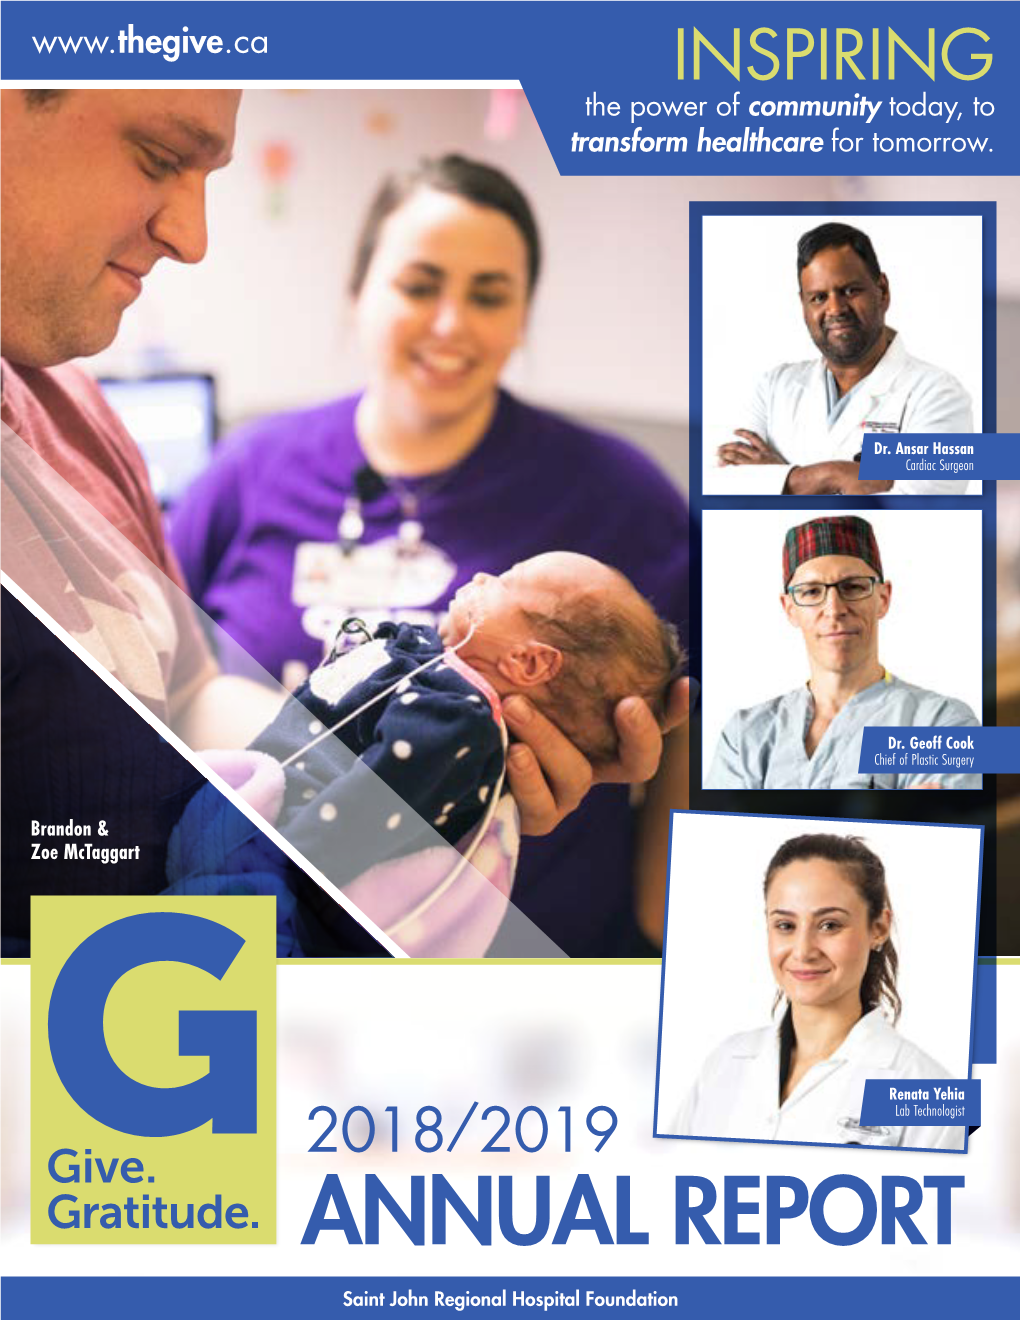 2019 Annual Report Saint John Regional Hospital Foundation 3 a NOTE from HORIZON HEALTH G EDUCATION Learn More At